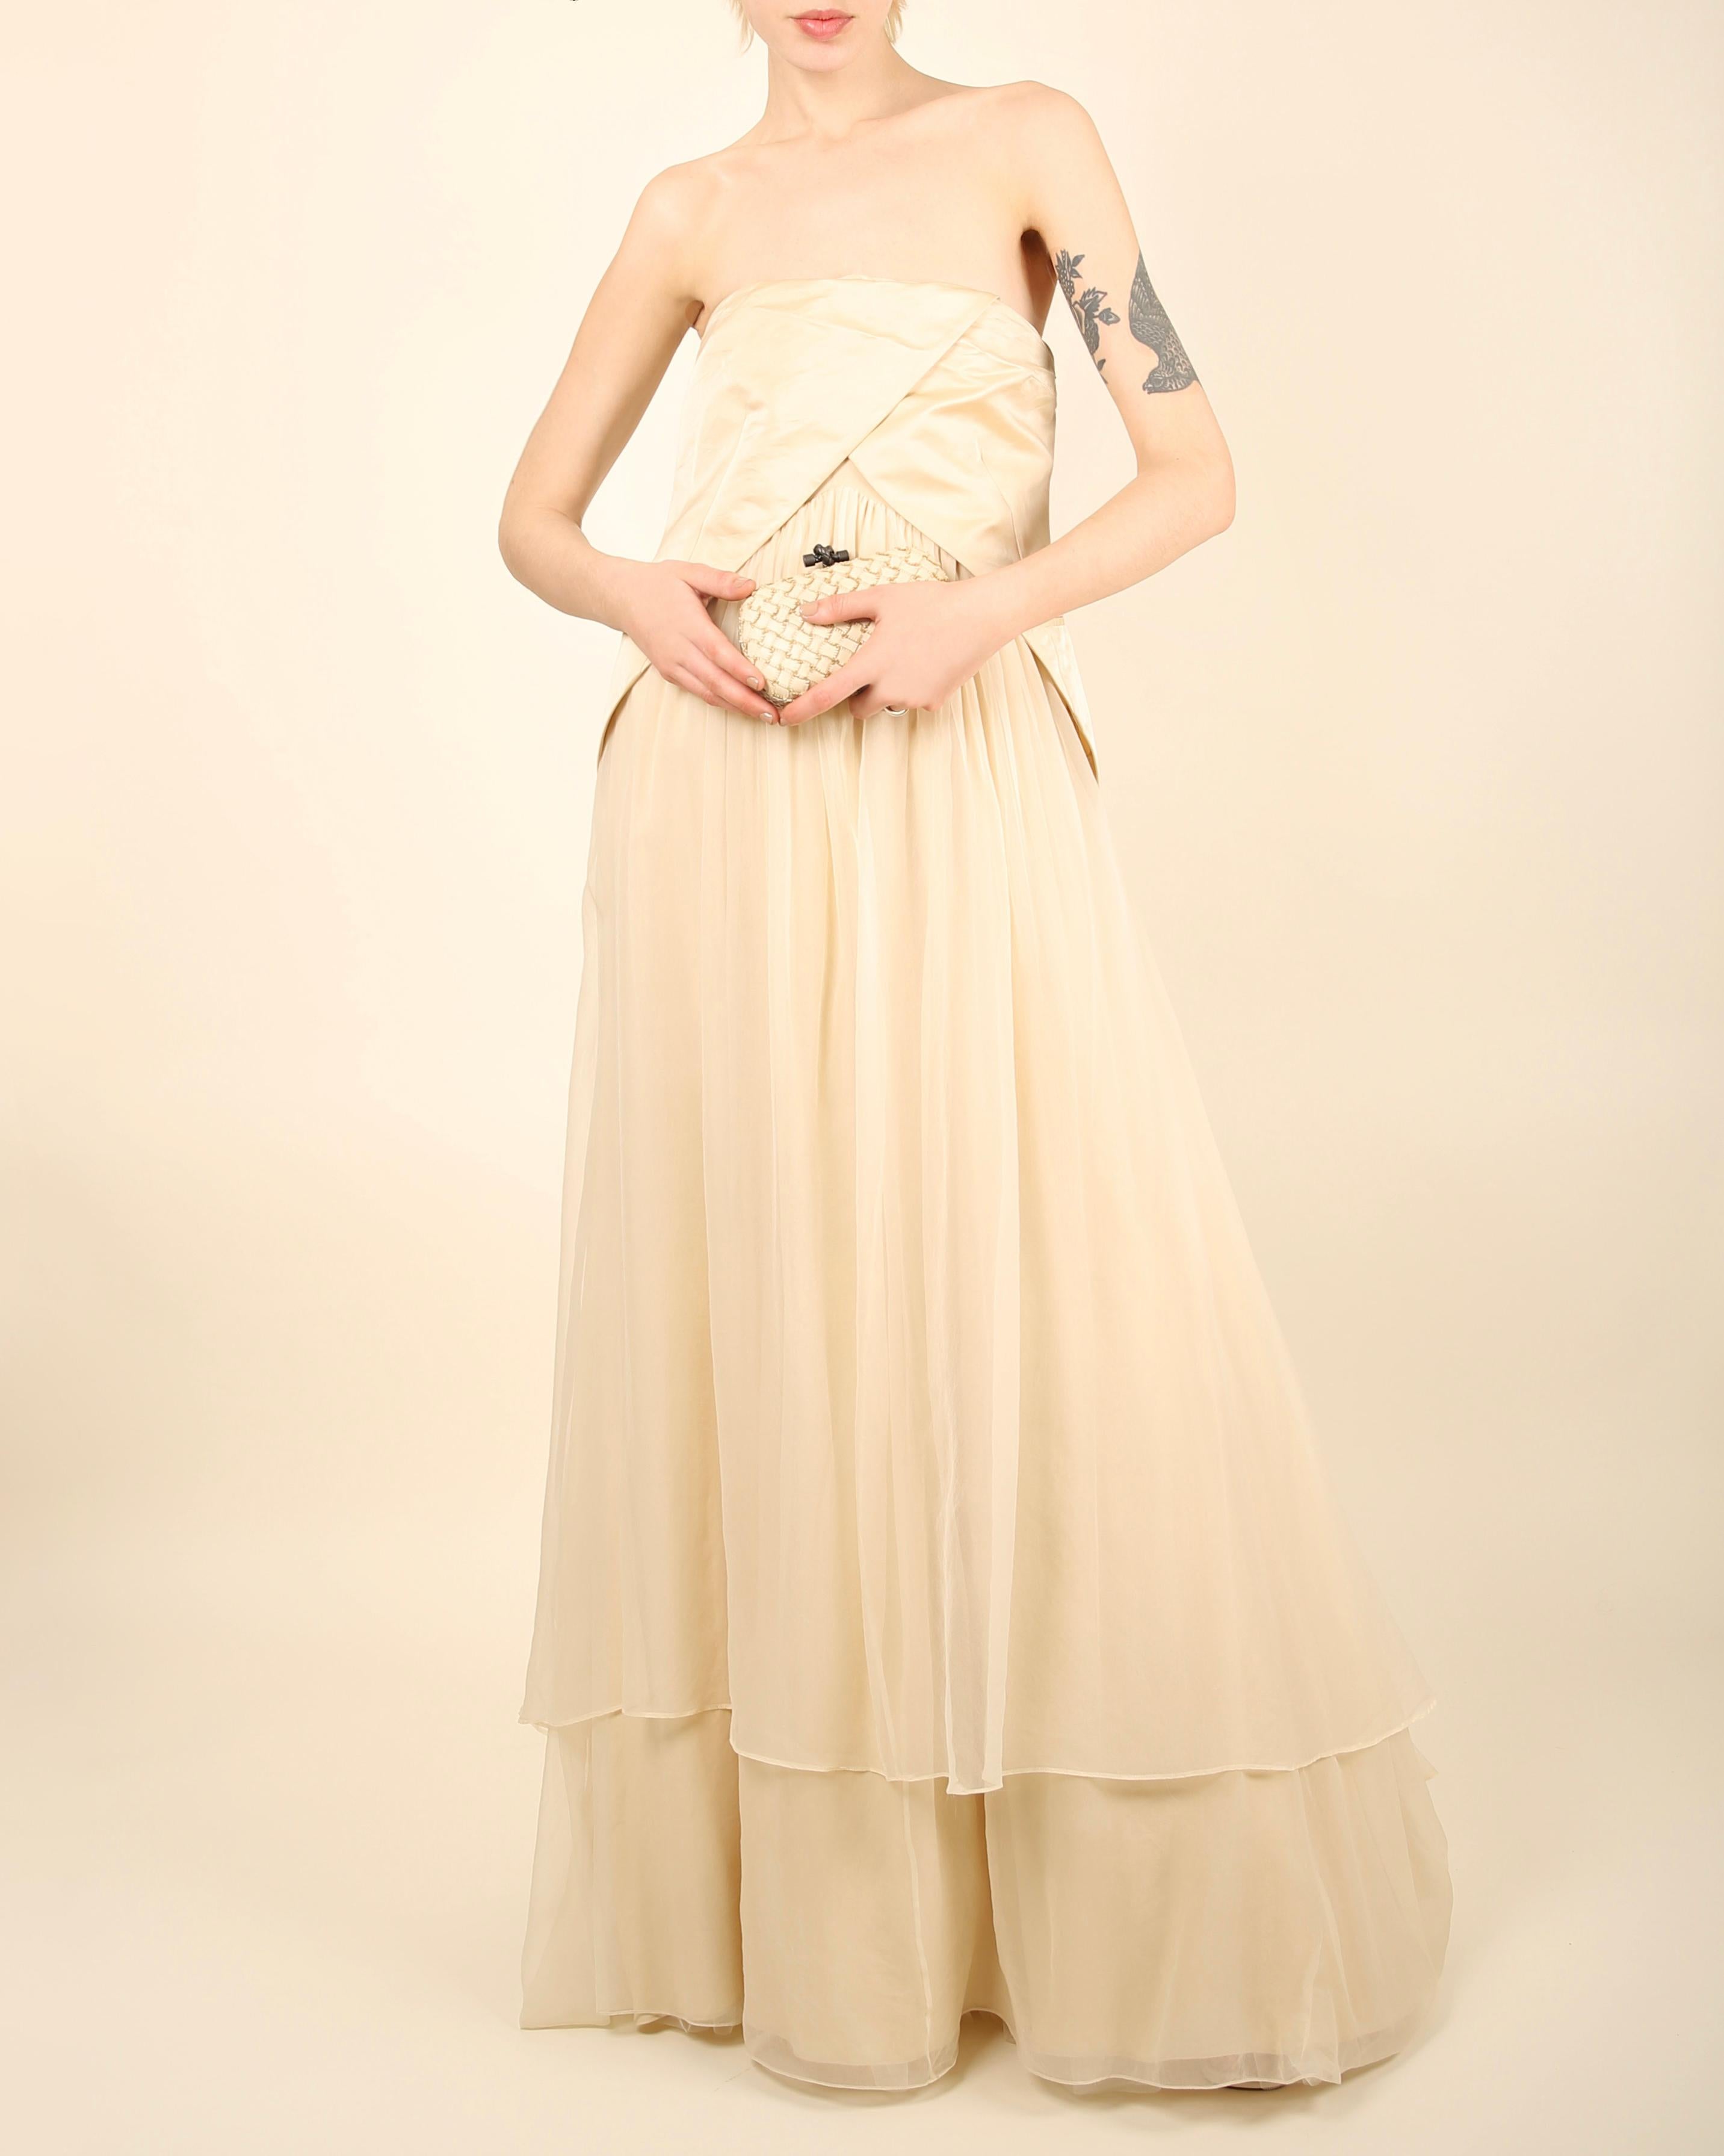 LOVE LALI Vintage

A very special gown by Brunello Cucinelli in cream, sadly the dress is large for the model in the photos and so they do not do this dress the full justice it deserves, please keep in mind when viewing them that the bust and waist